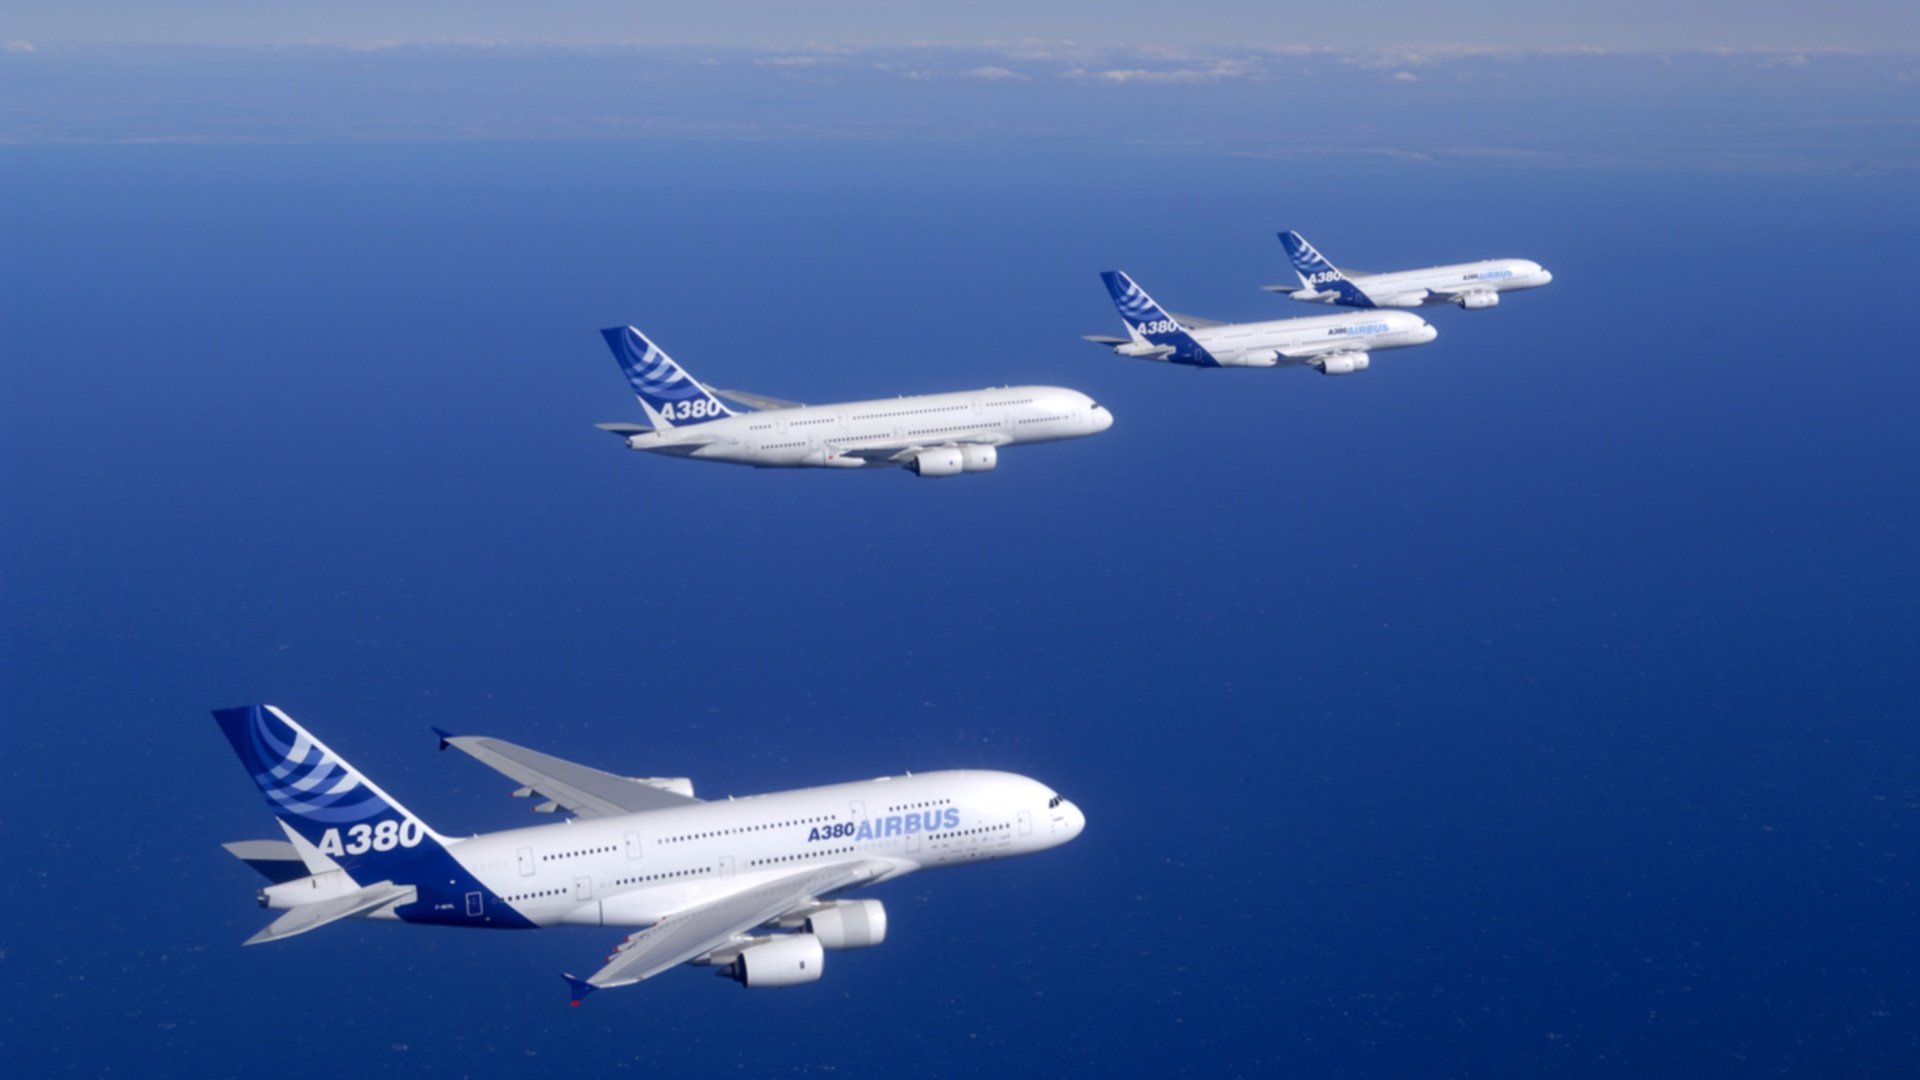 blue, Aircraft, Airbus, Airbus, A380 800, Skyscapes Wallpaper